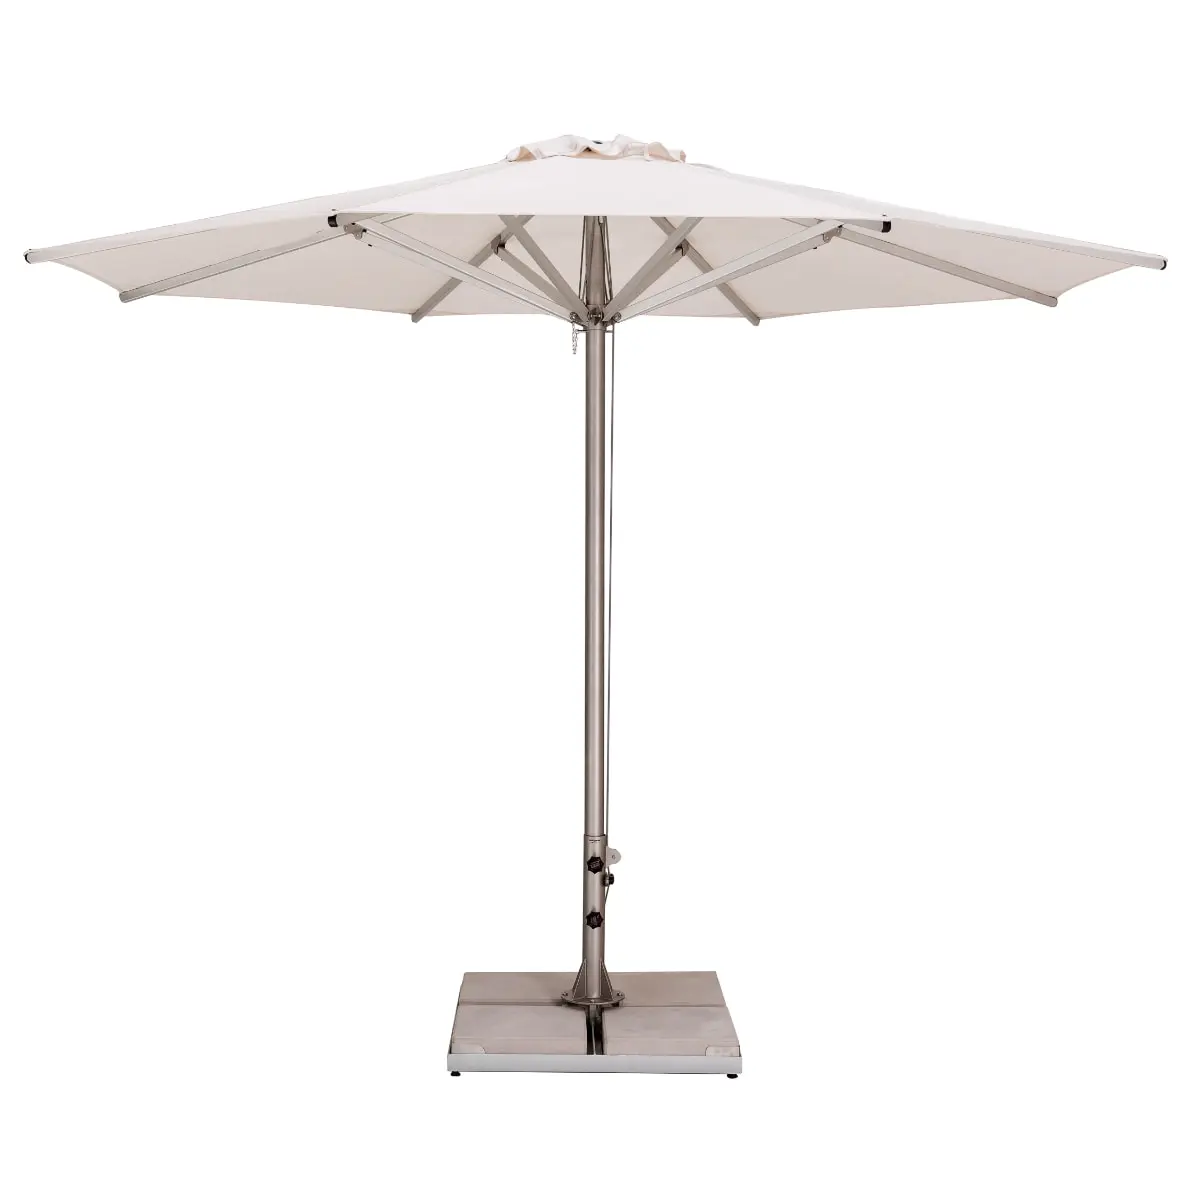 Ultimate Patio Umbrellas Ing Guide, What Type Of Patio Umbrella Is Best For Sun Protection